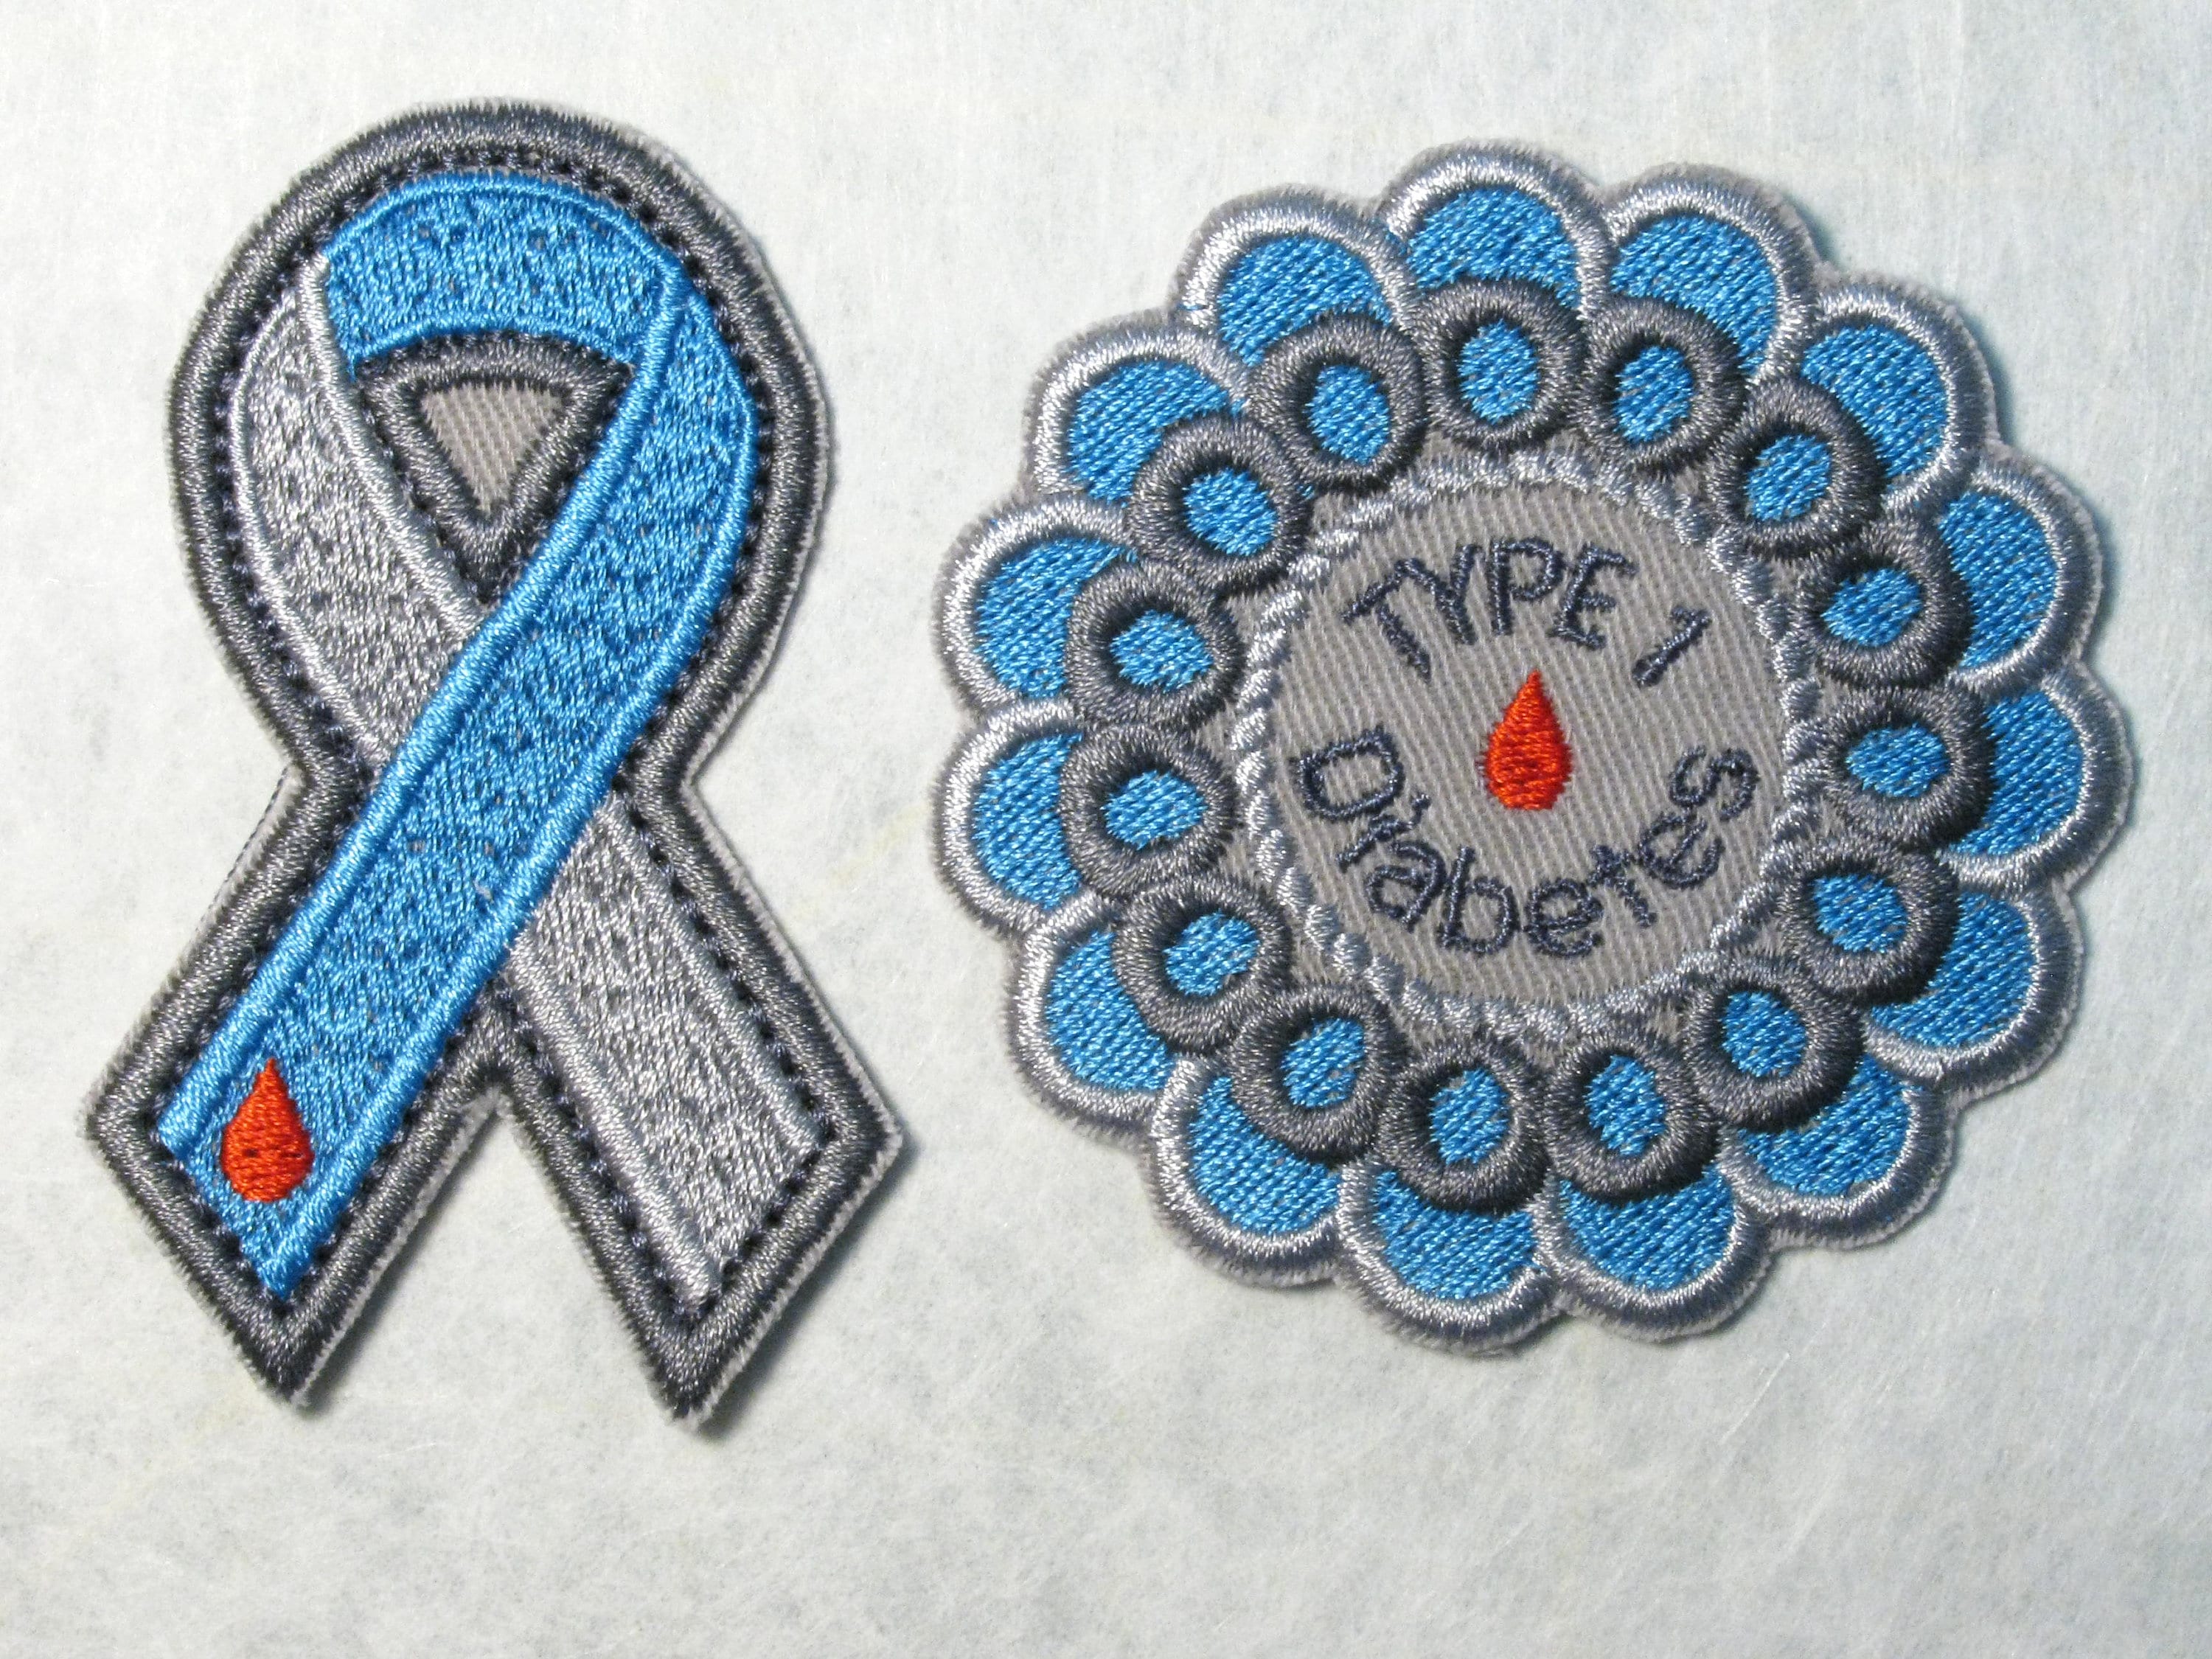 Diabetic Type 1 Medical Alert Symbol Embroidered Patch Badge (A)